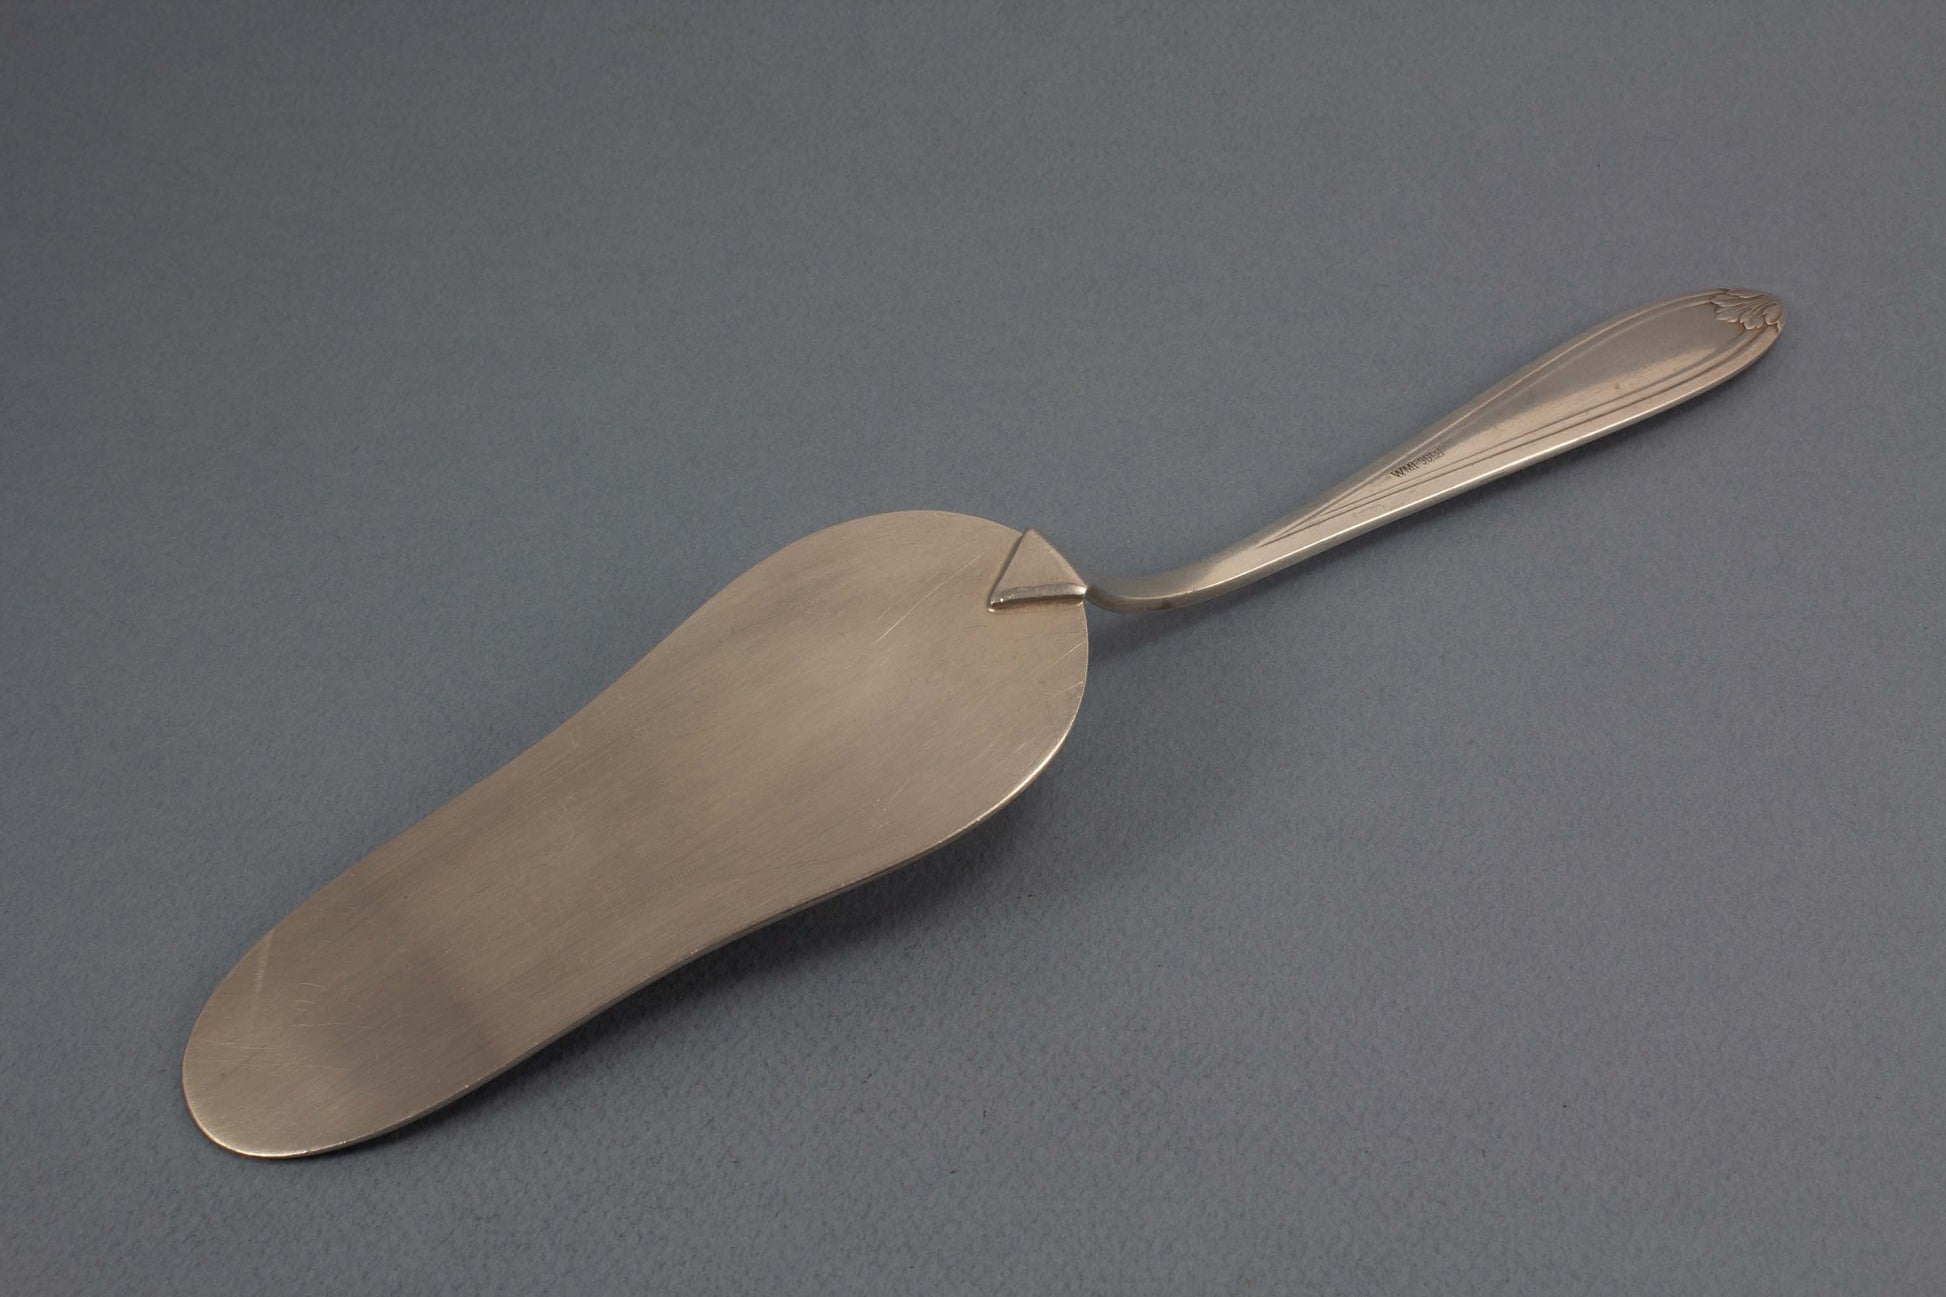 Beautiful silver plated cake server by WMF with akanthus pattern 